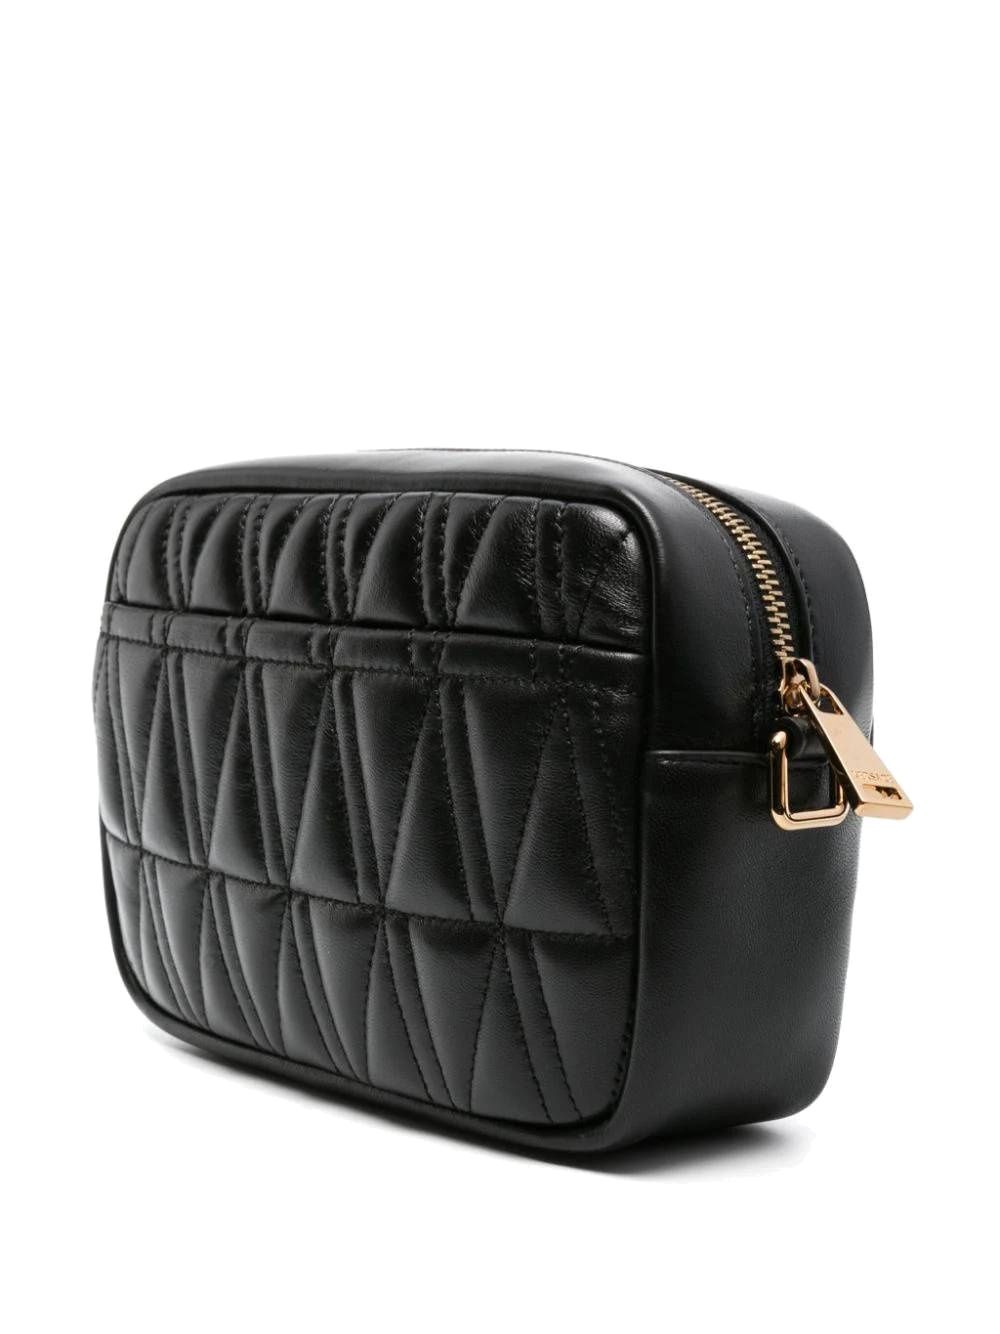 Quilted black nappa leather bag